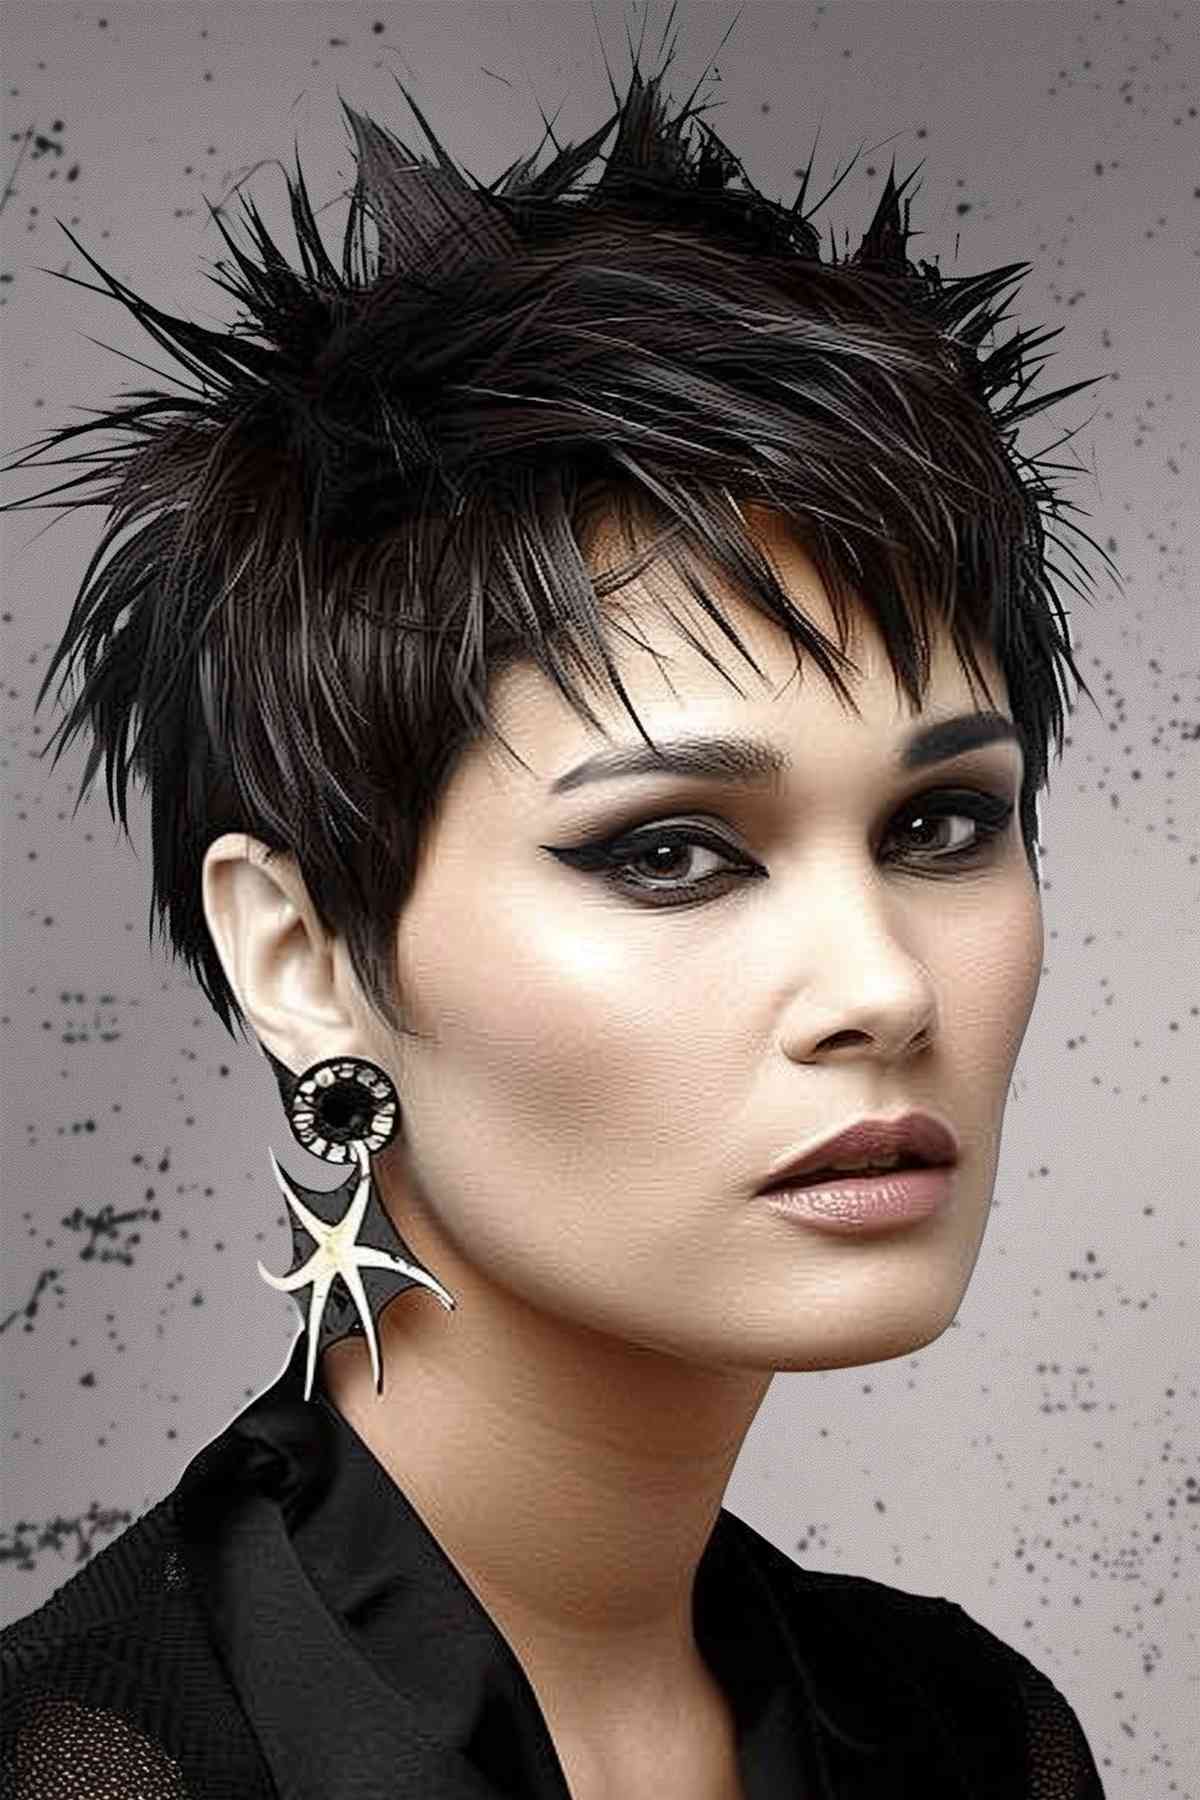 Short and spiky punk pixie cut in a natural dark color, providing a low-maintenance, textured style ideal for adding volume.